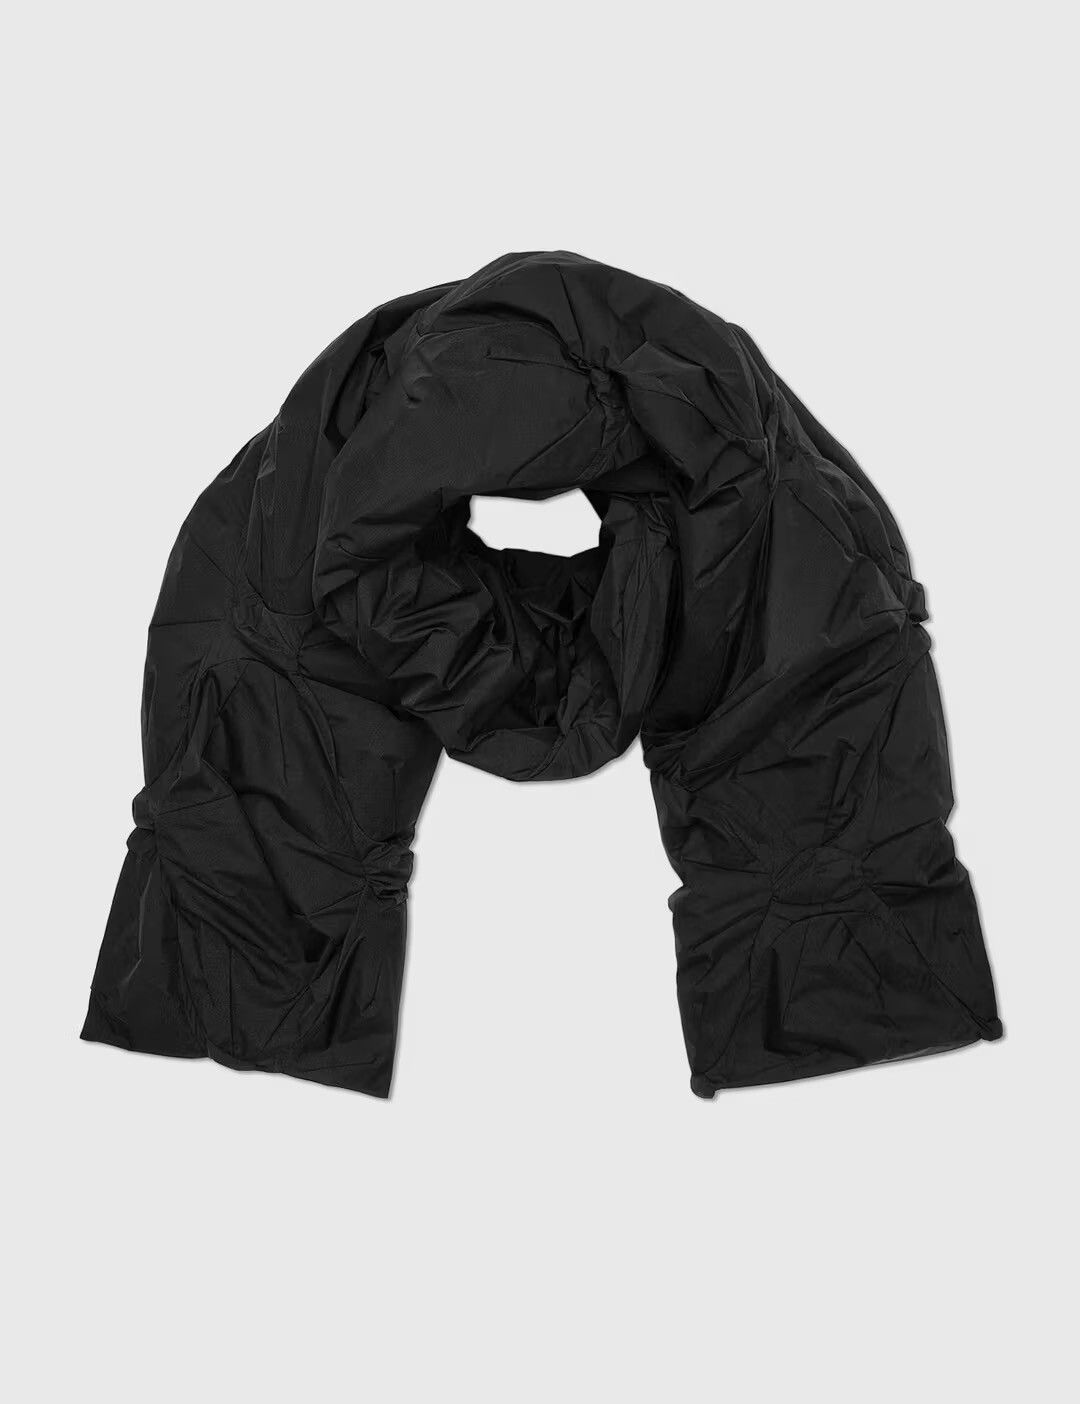 POST ARCHIVE FACTION (PAF) $1,100 Giant 4.0 Down Puffer Scarf Left Size ONE SIZE - 3 Thumbnail